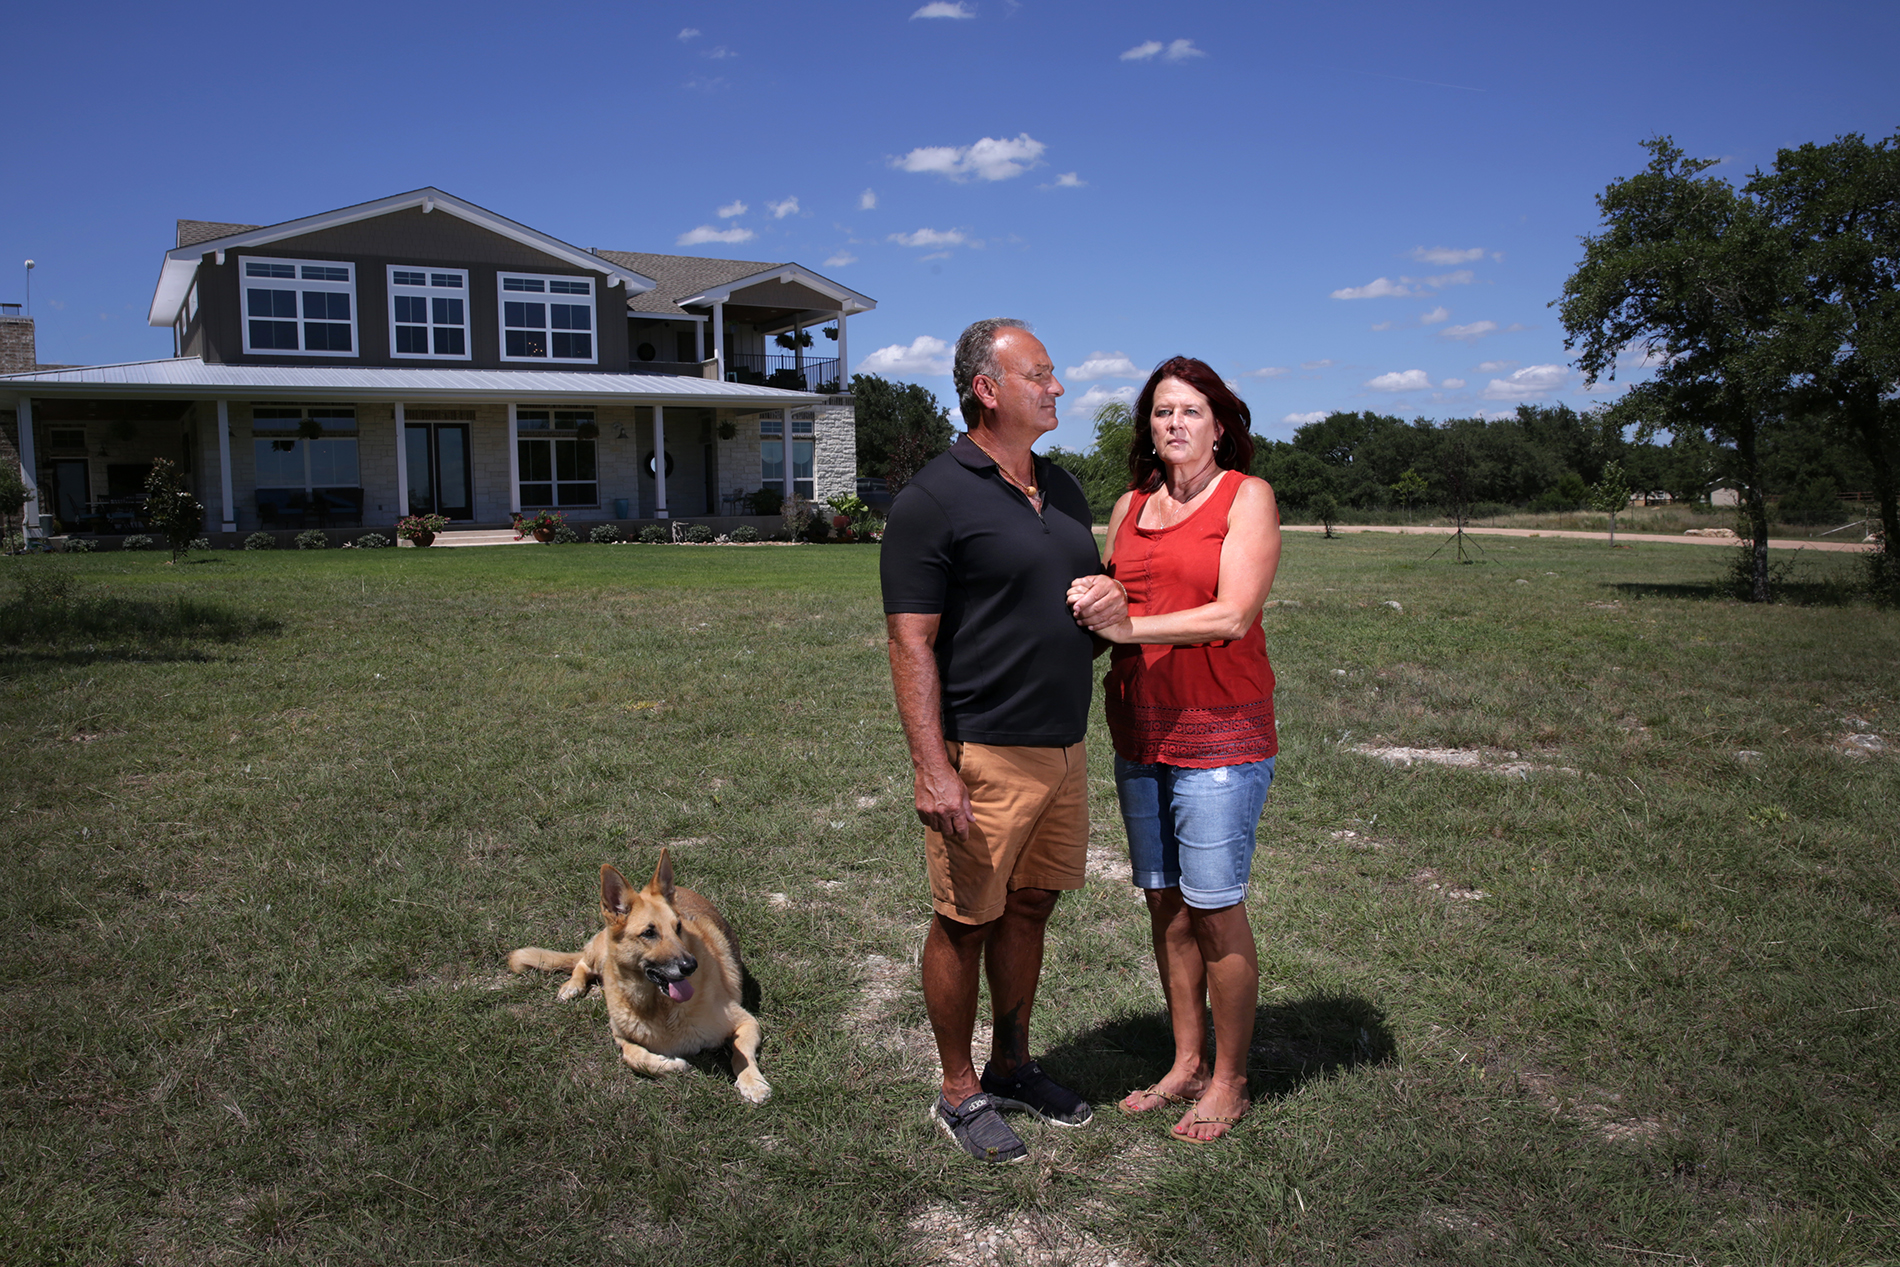 Retired Austin assistant fire chief, Kevin Baum, 57, stands with his wife Gwen, 56, and his dog Bonnie outside their home between Marble Falls and Burnet.